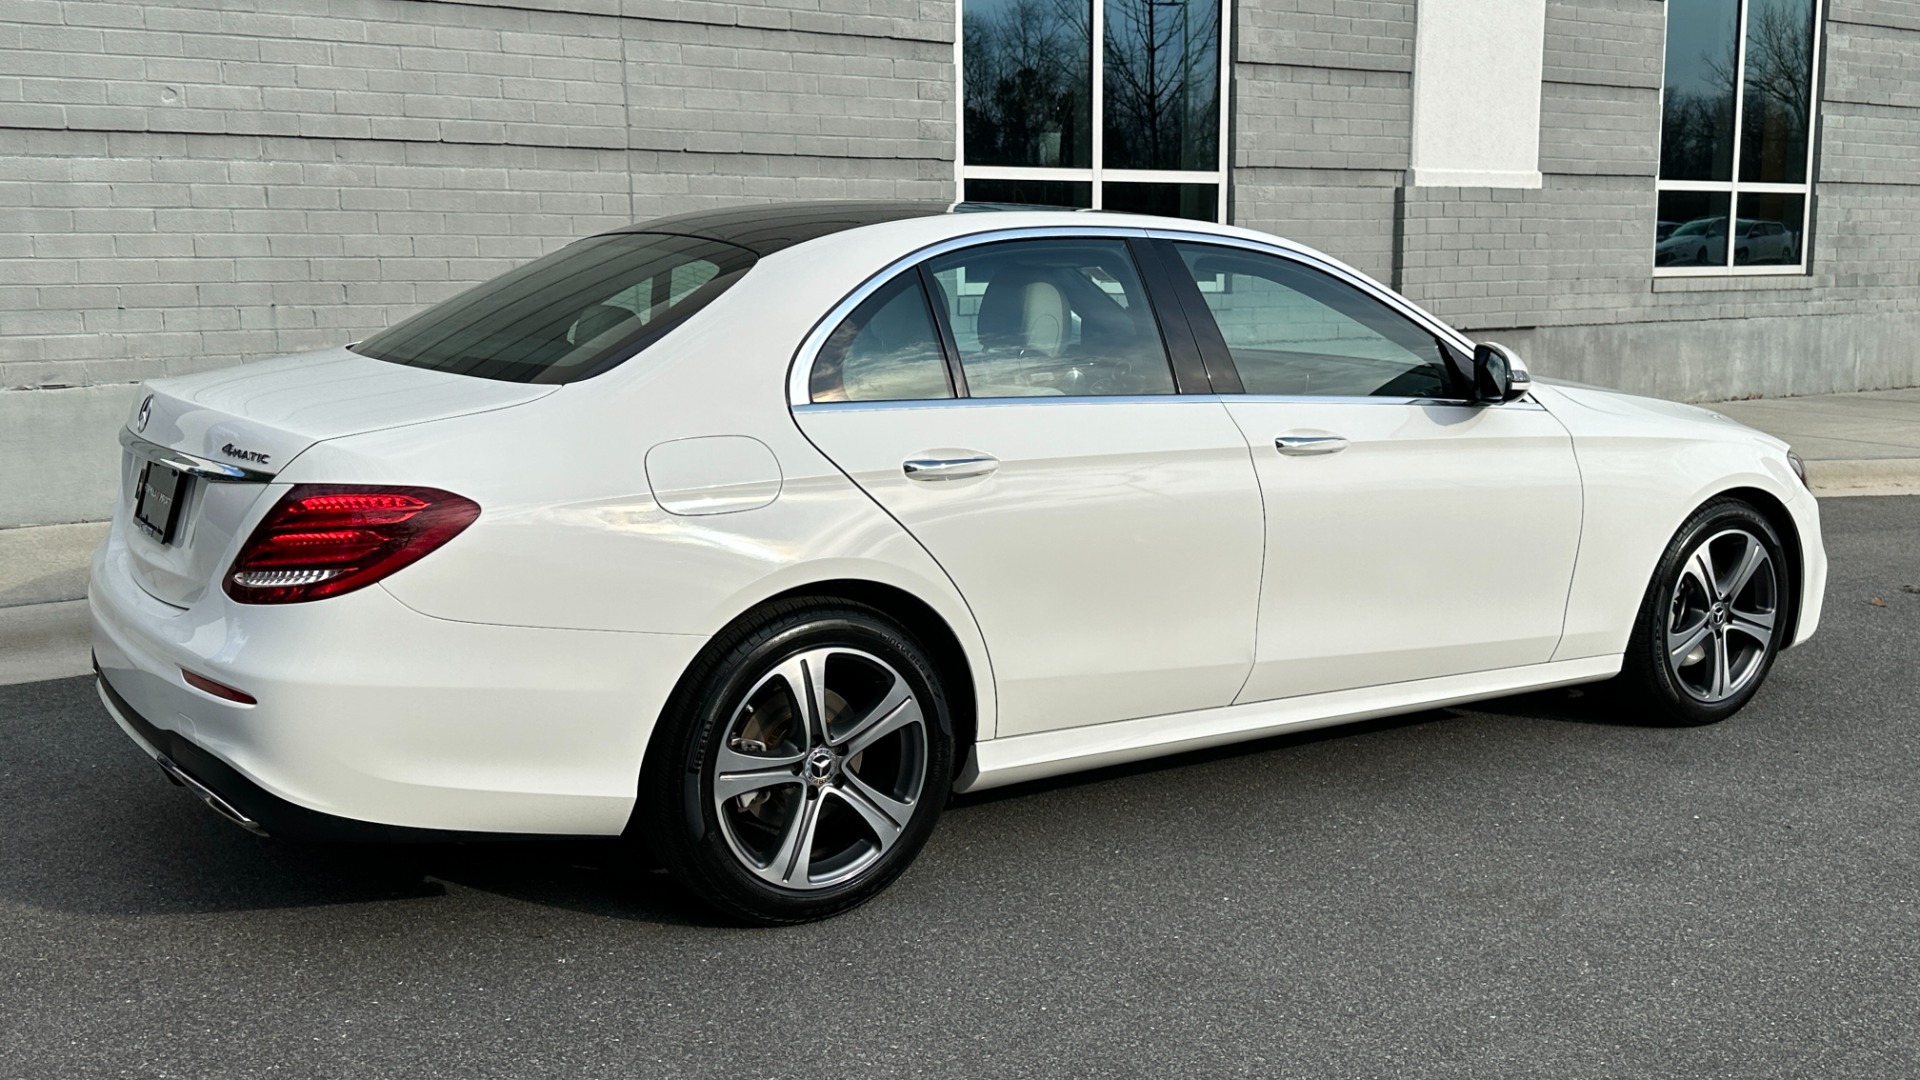 Used 2019 Mercedes-Benz E-Class E300 / PREMIUM PACKAGE / BLIND SPOT / BURMESTER SOUND / HEATED STEERING for sale $35,400 at Formula Imports in Charlotte NC 28227 4